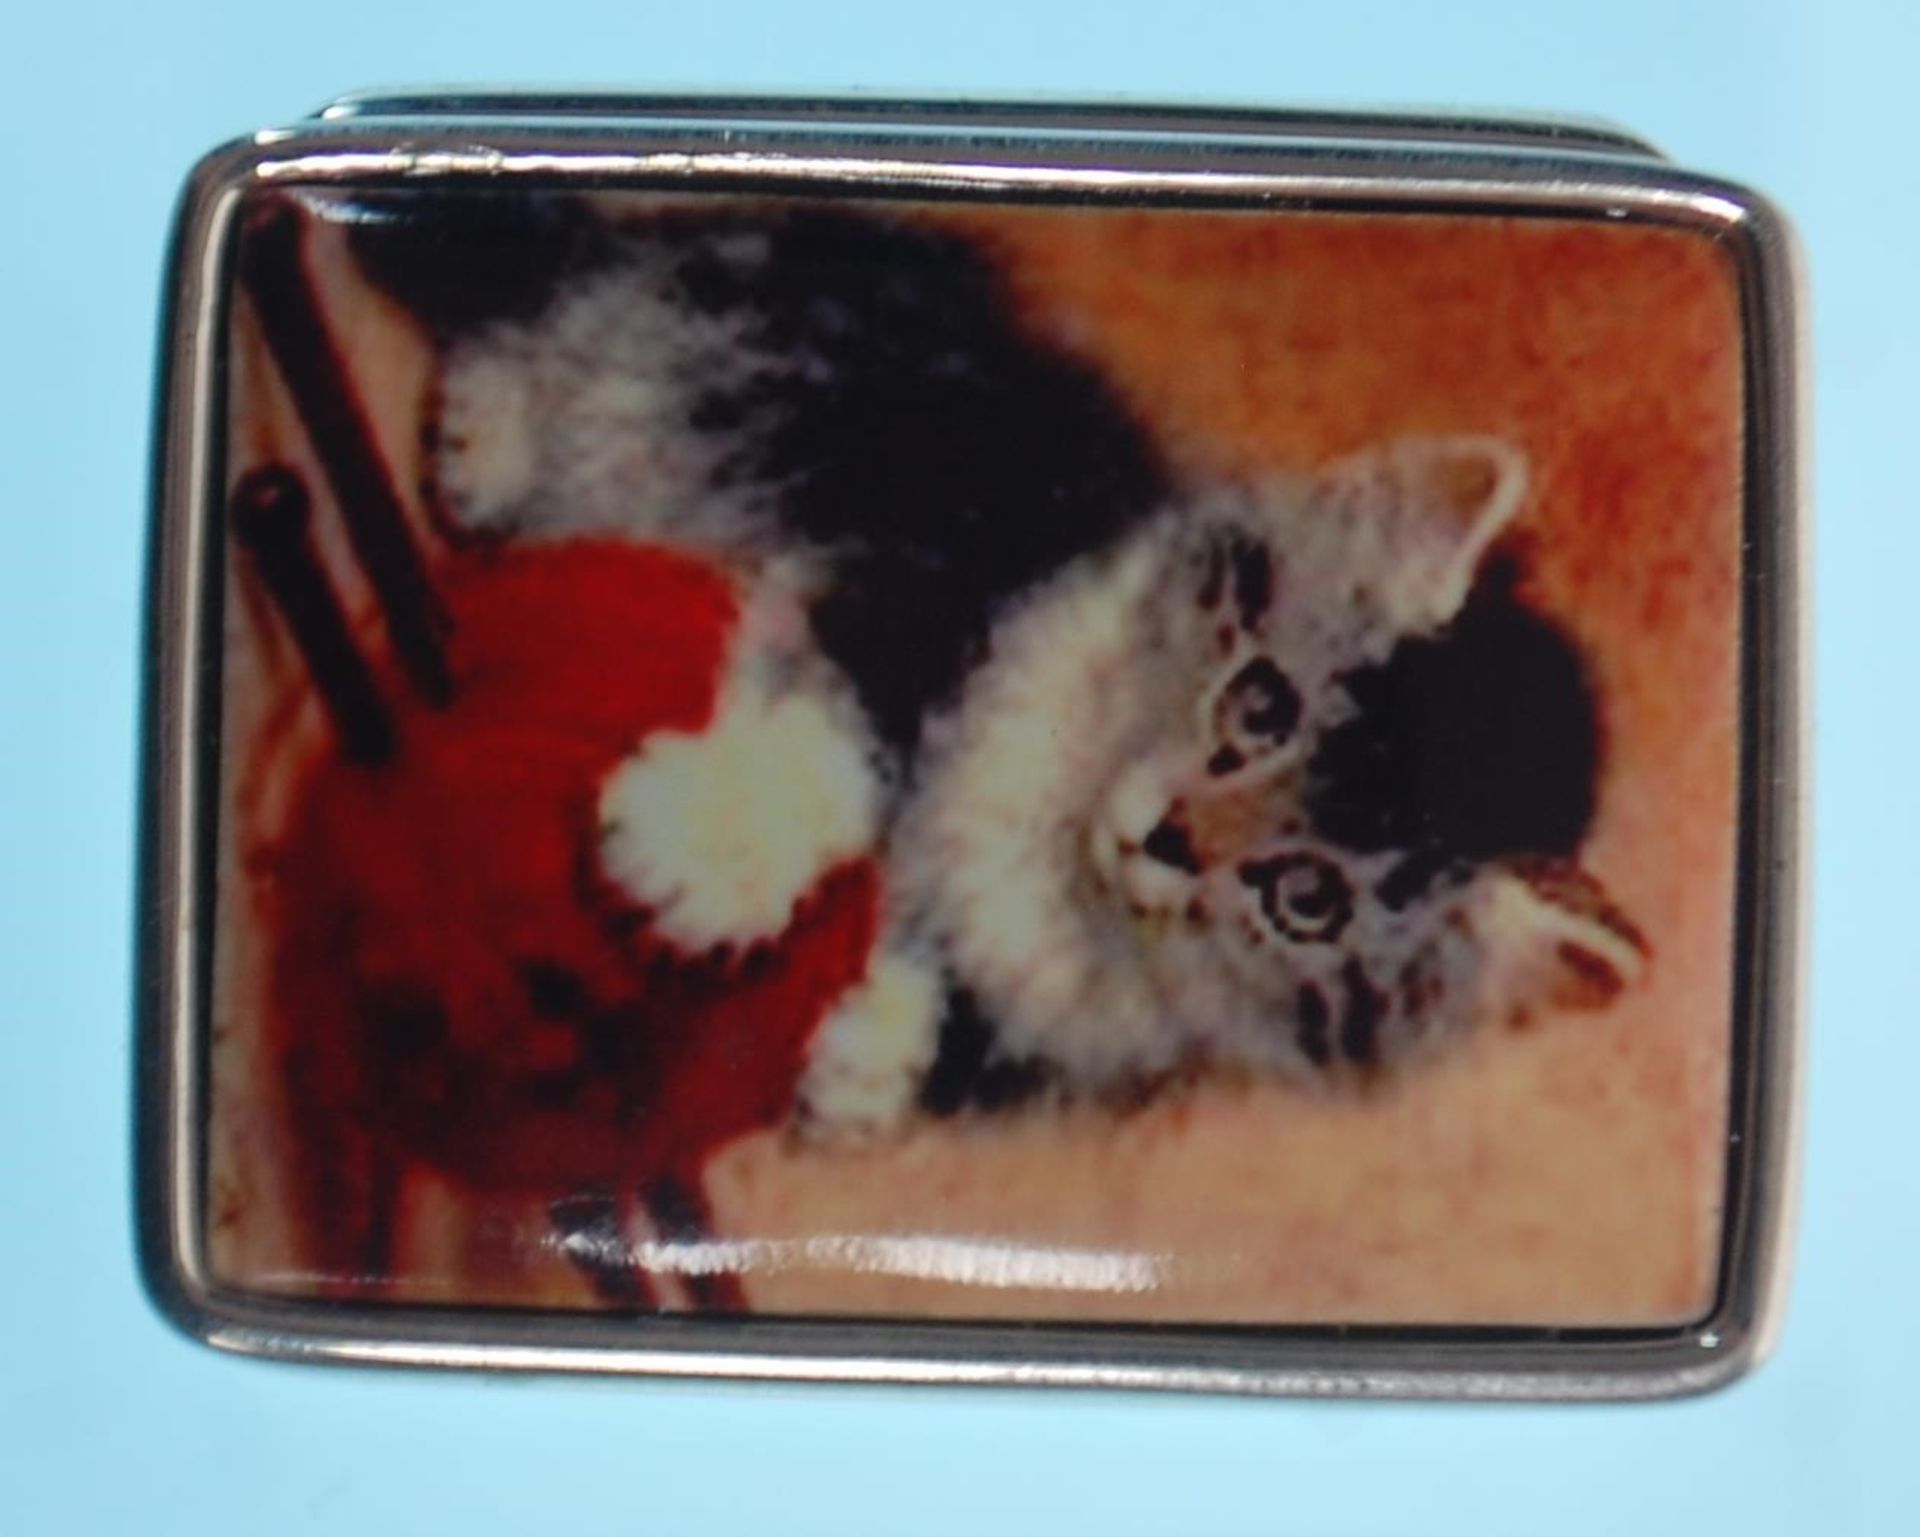 A stamped sterling silver pill box of square form having an enamelled lid with a kitten and wool